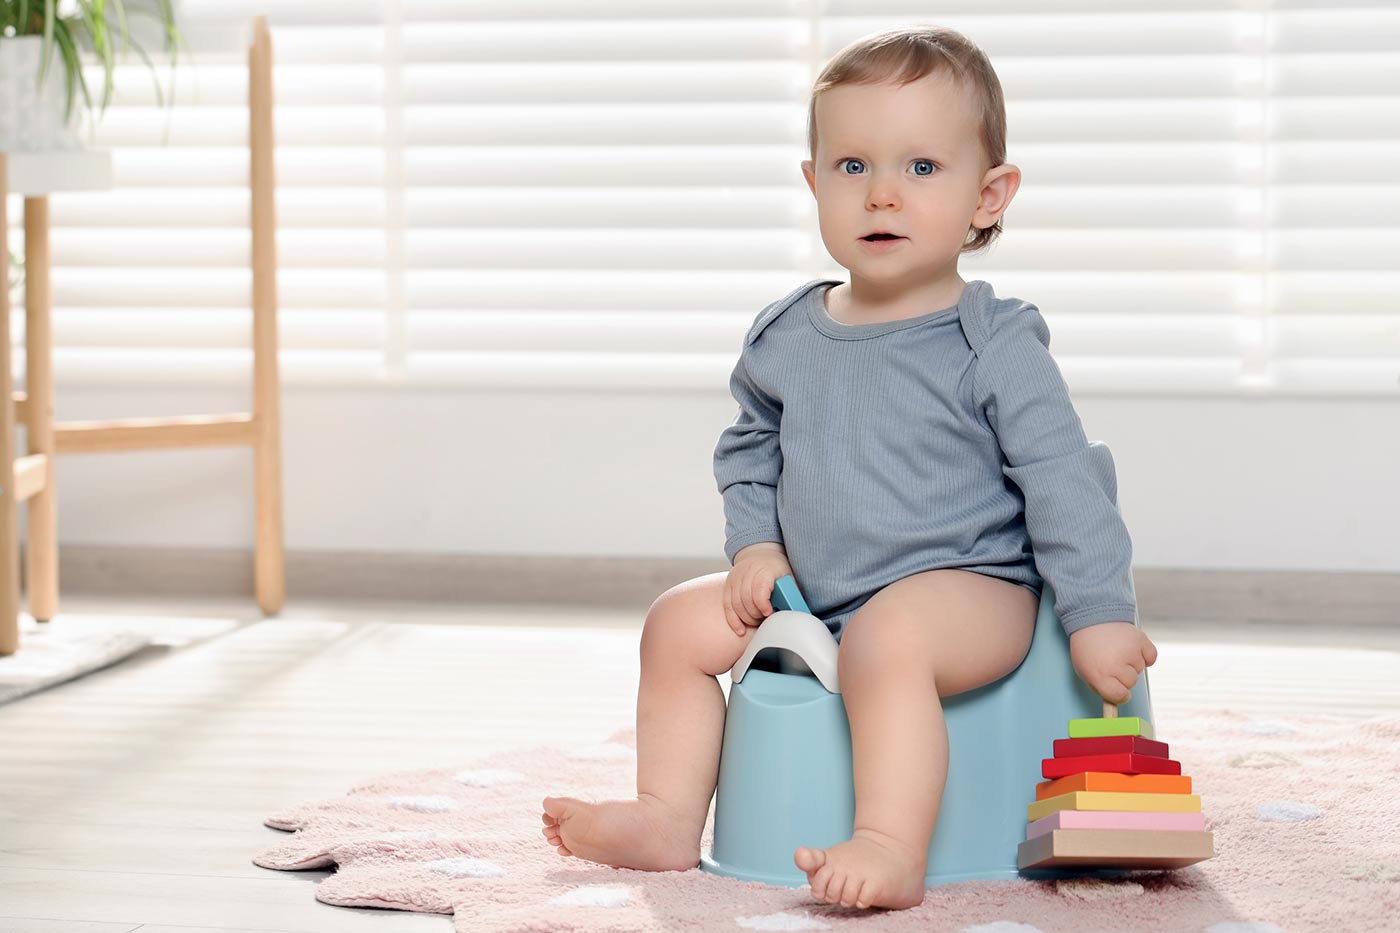 Signs Your Child Is Not Ready for Potty Training